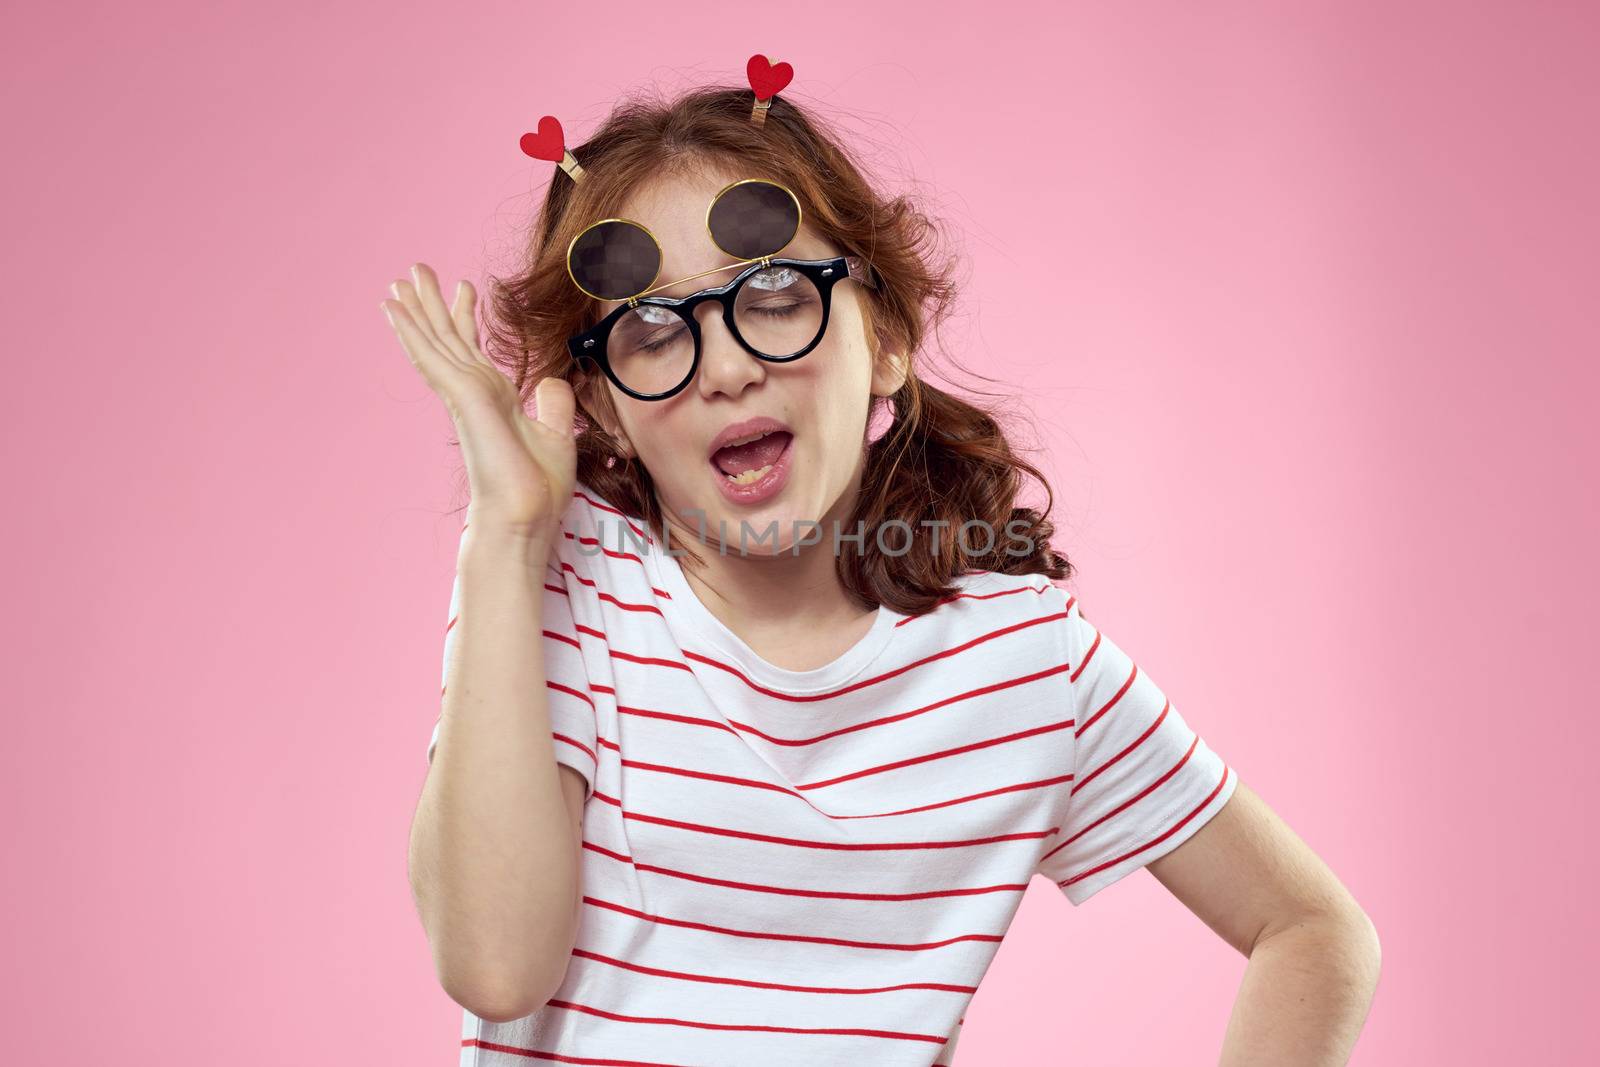 Cheerful girl with pigtails sunglasses striped t-shirt lifestyle pink background by SHOTPRIME